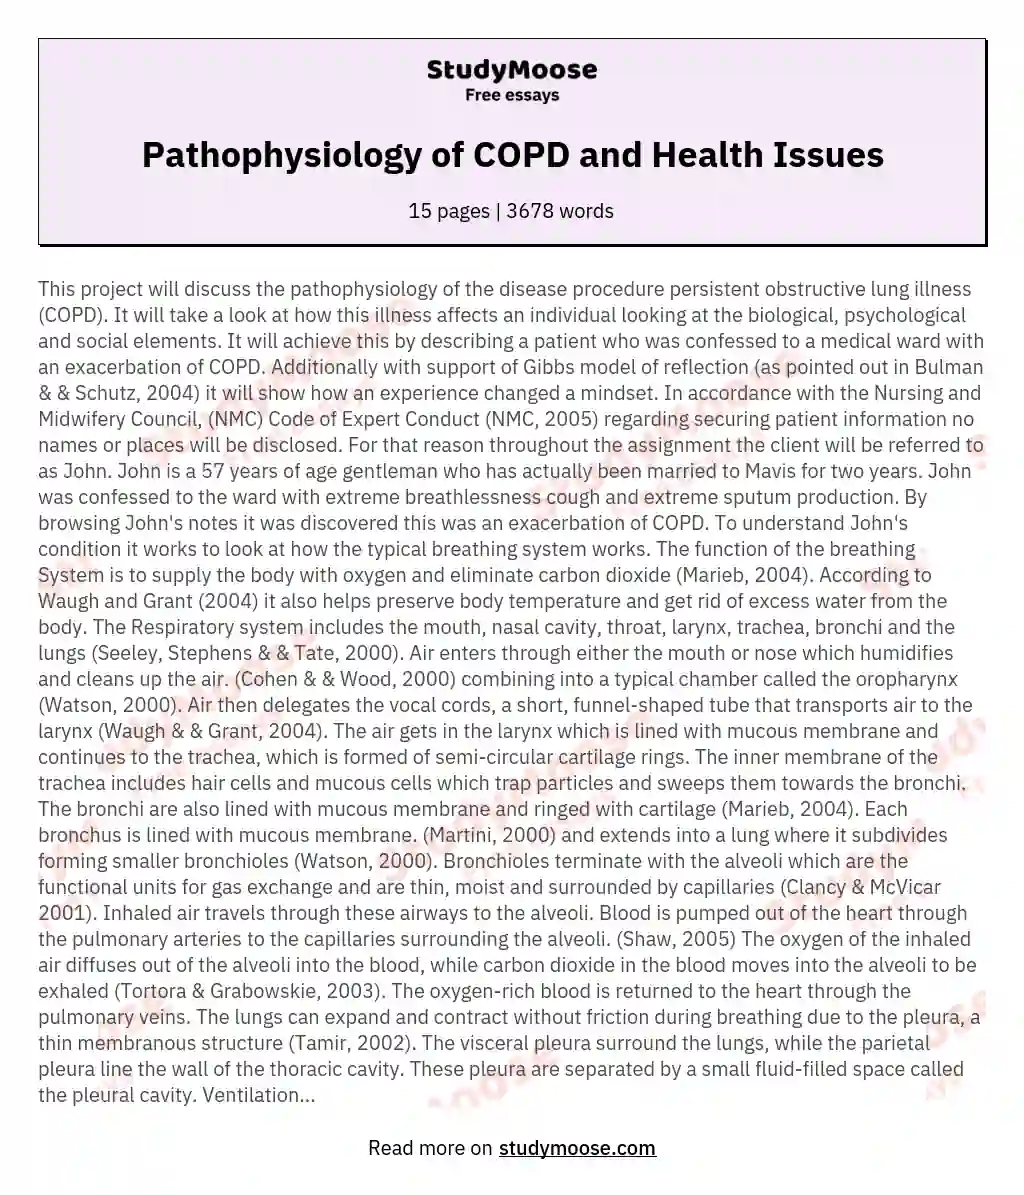 Pathophysiology of COPD and Health Issues